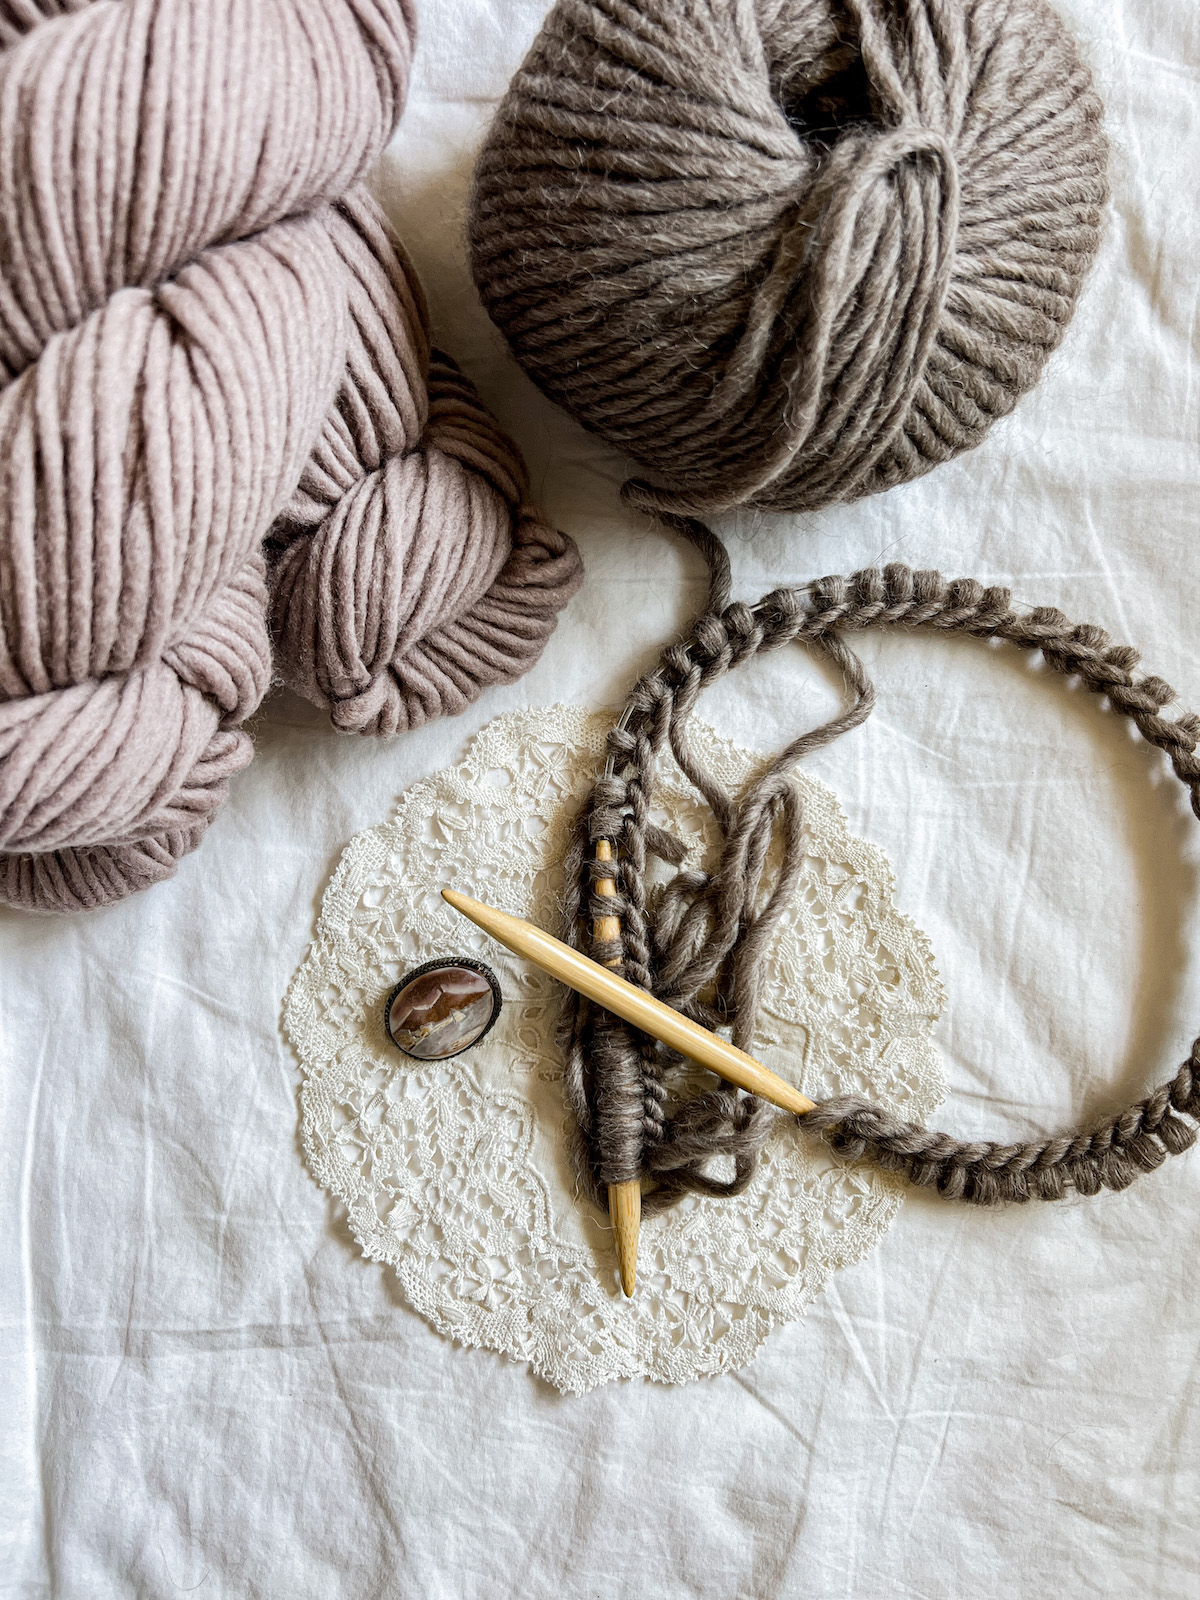 A flatlay photo of a few skeins of medium-brown yarn, a ball of dark brown yarn, and some wooden circular needles with lots of dark brown stitches cast on to them. The needles are resting on a white lace antique doily with a carved shell brooch next to them.